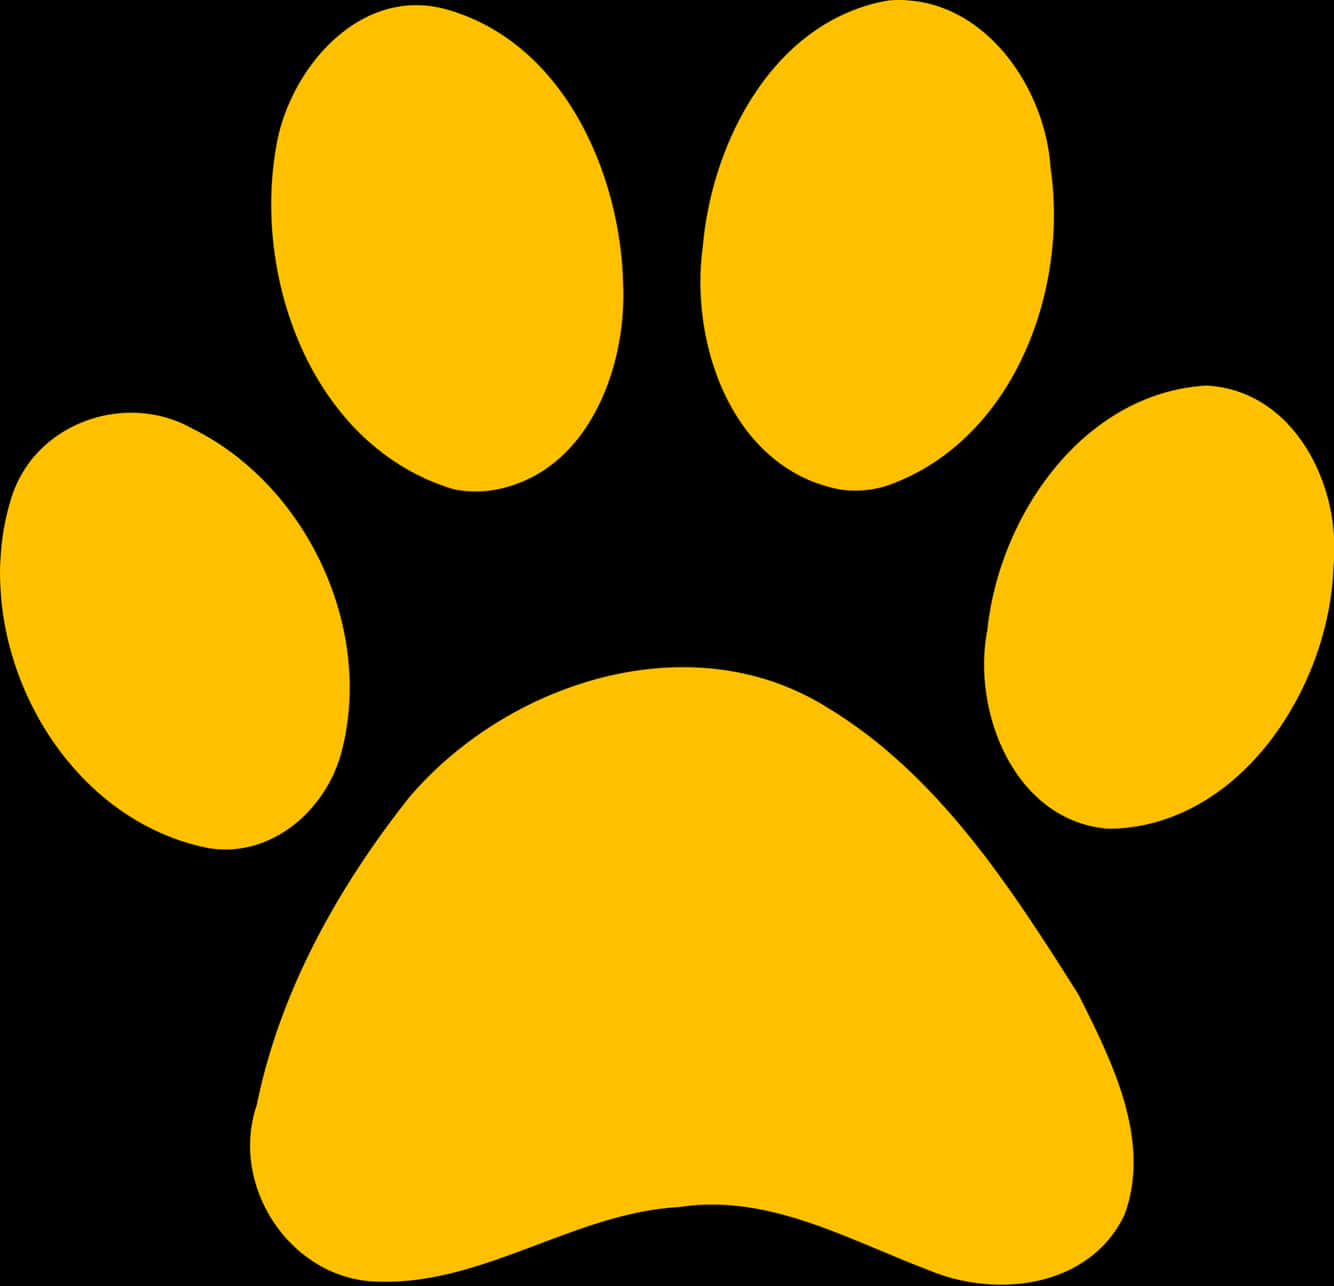 A Yellow Paw Print On A Black Background